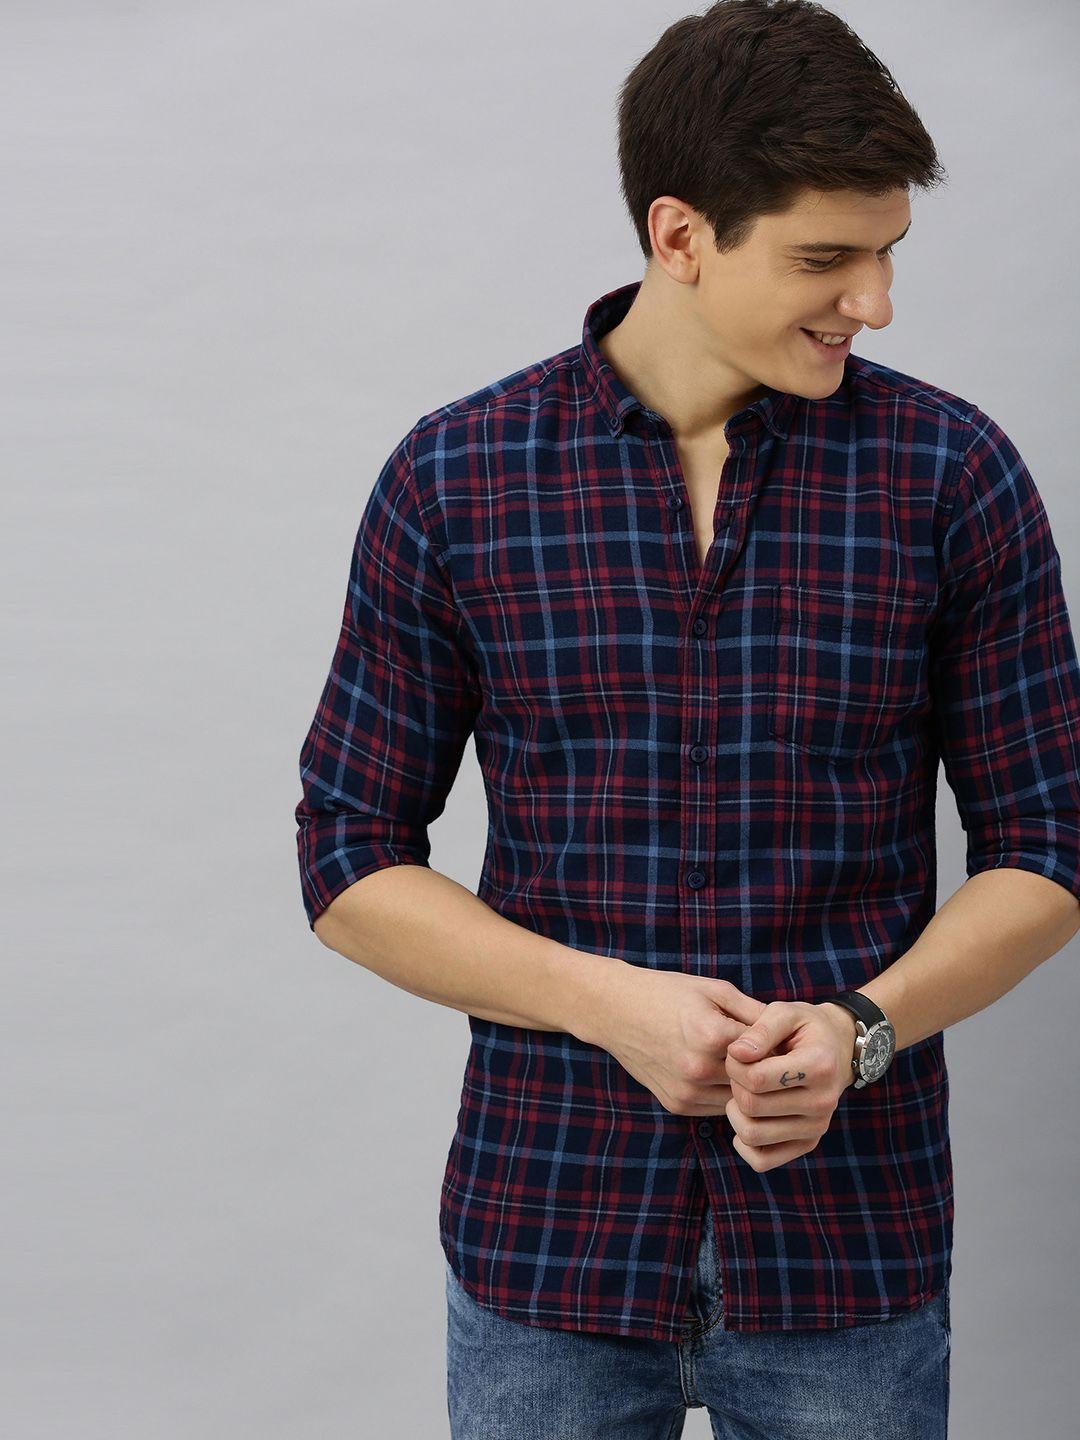 mast-&-harbour-men-navy-blue-&-red-checked-casual-sustainable-shirt